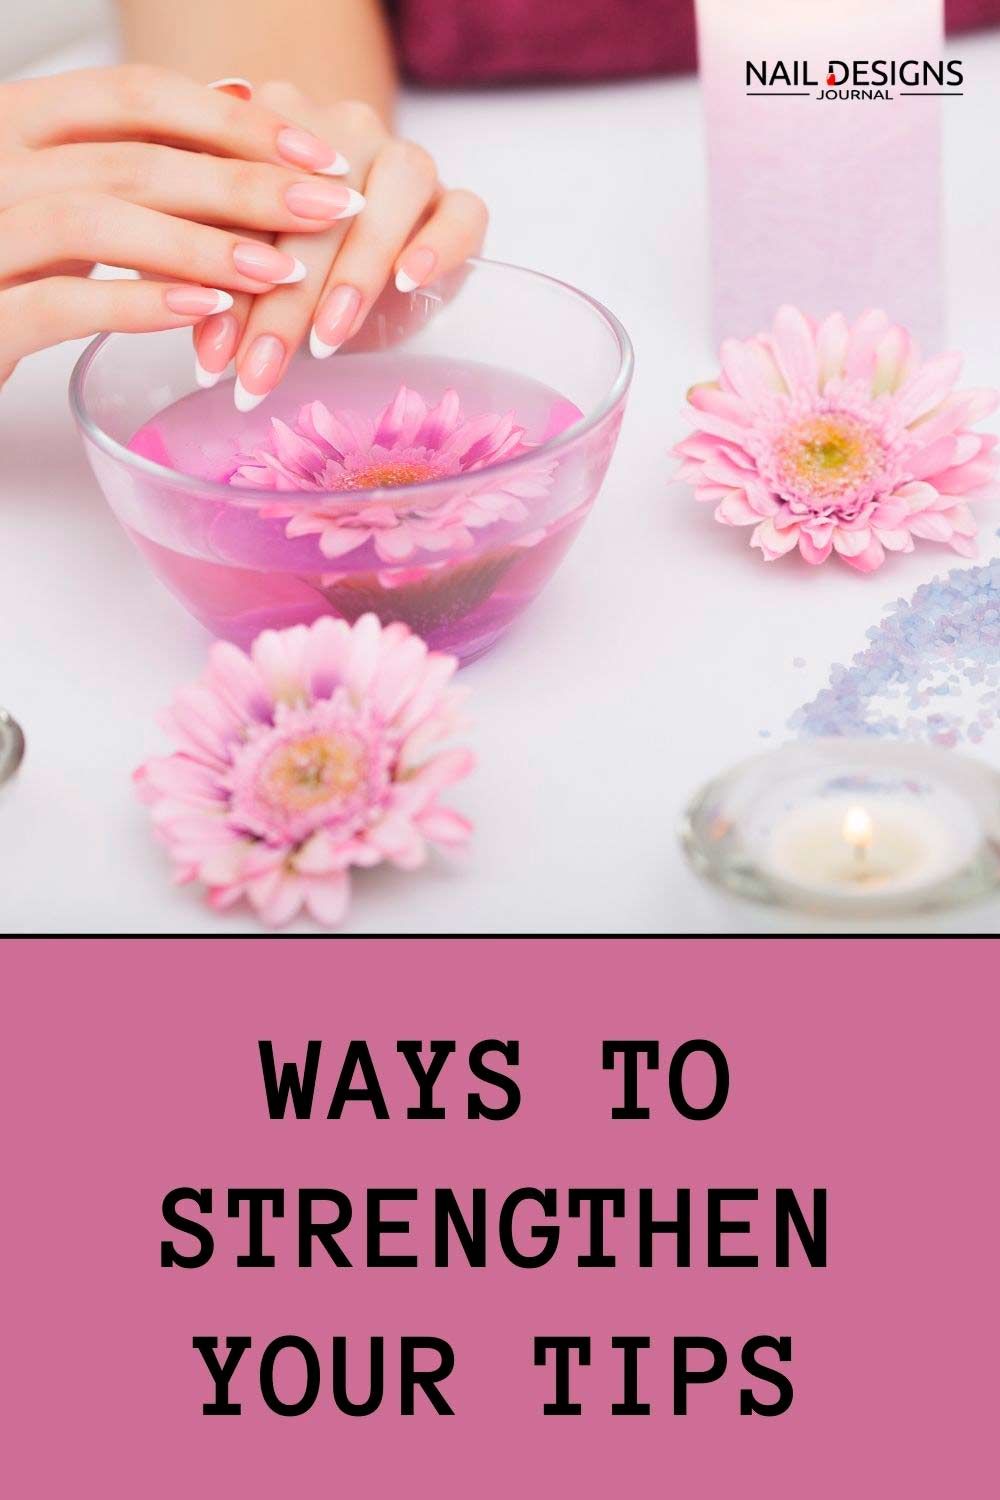 Primary Ways To Strengthen Your Tips